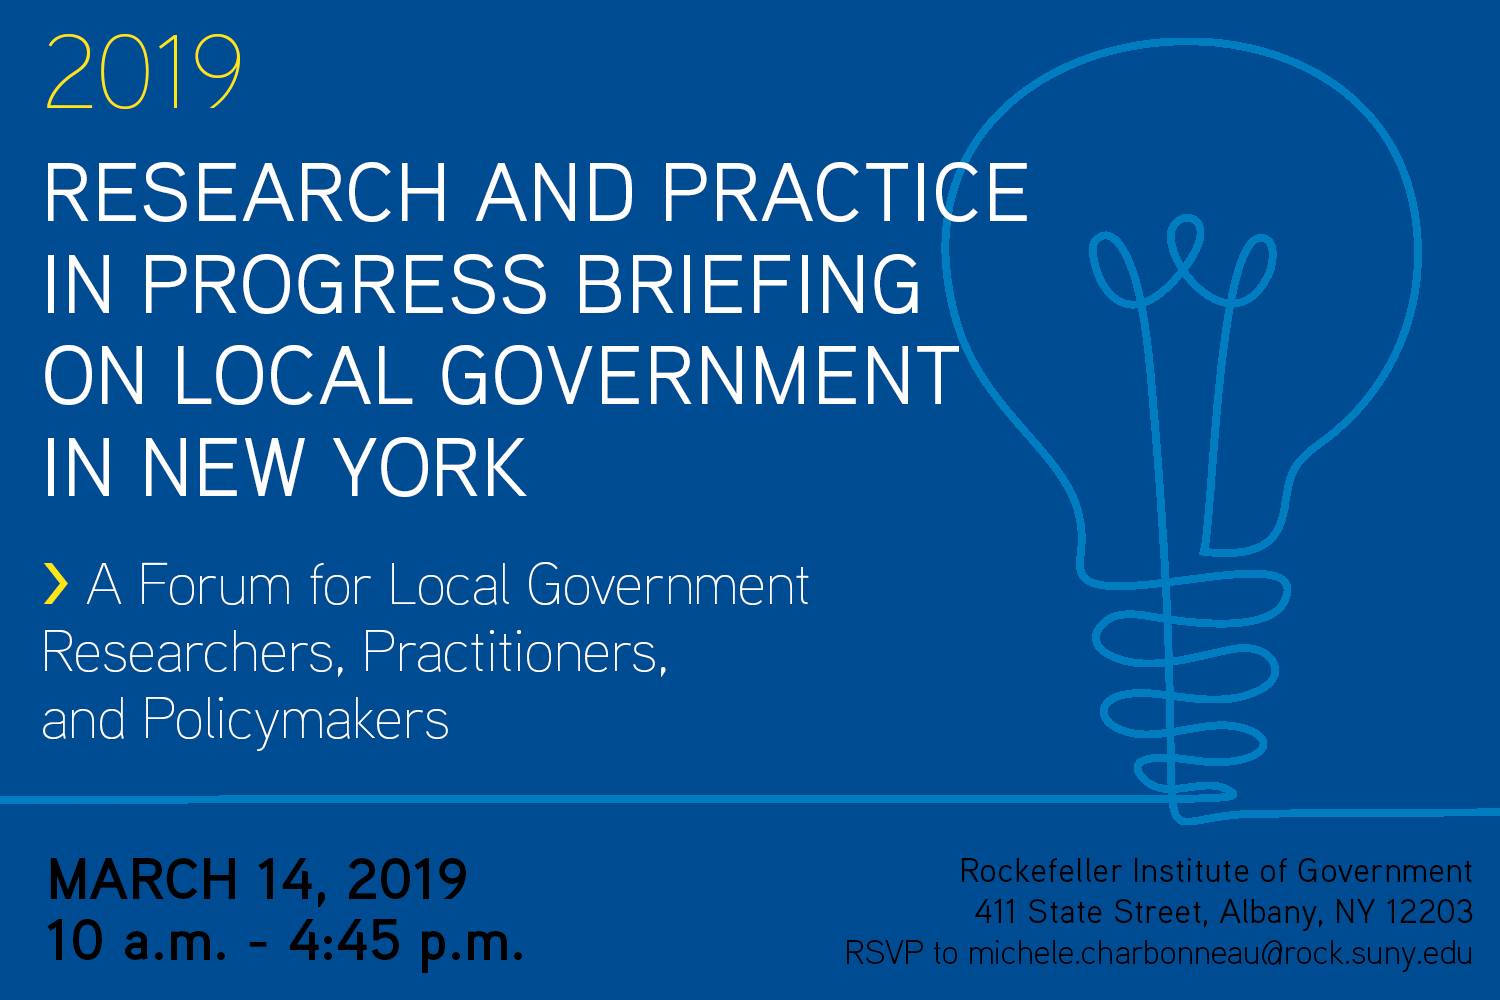 Research and Practice in Progress Briefing on Local Government in New